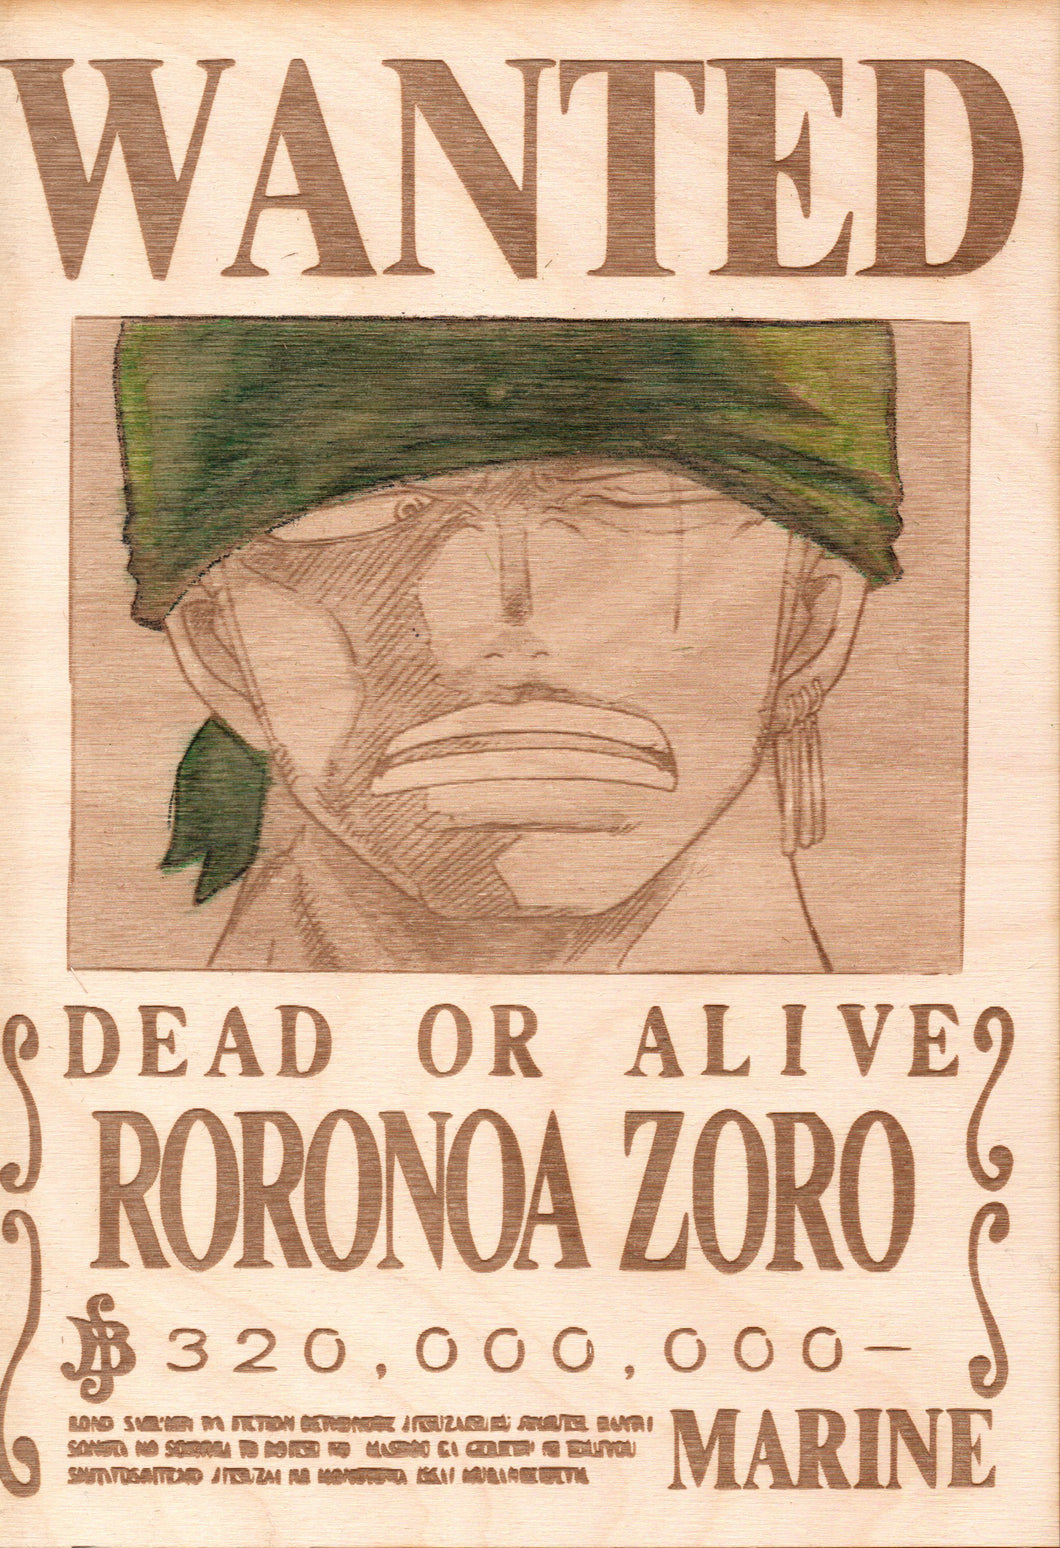 One Piece - Zoro Wooden Wanted Poster (Color) - TantrumCollectibles.com